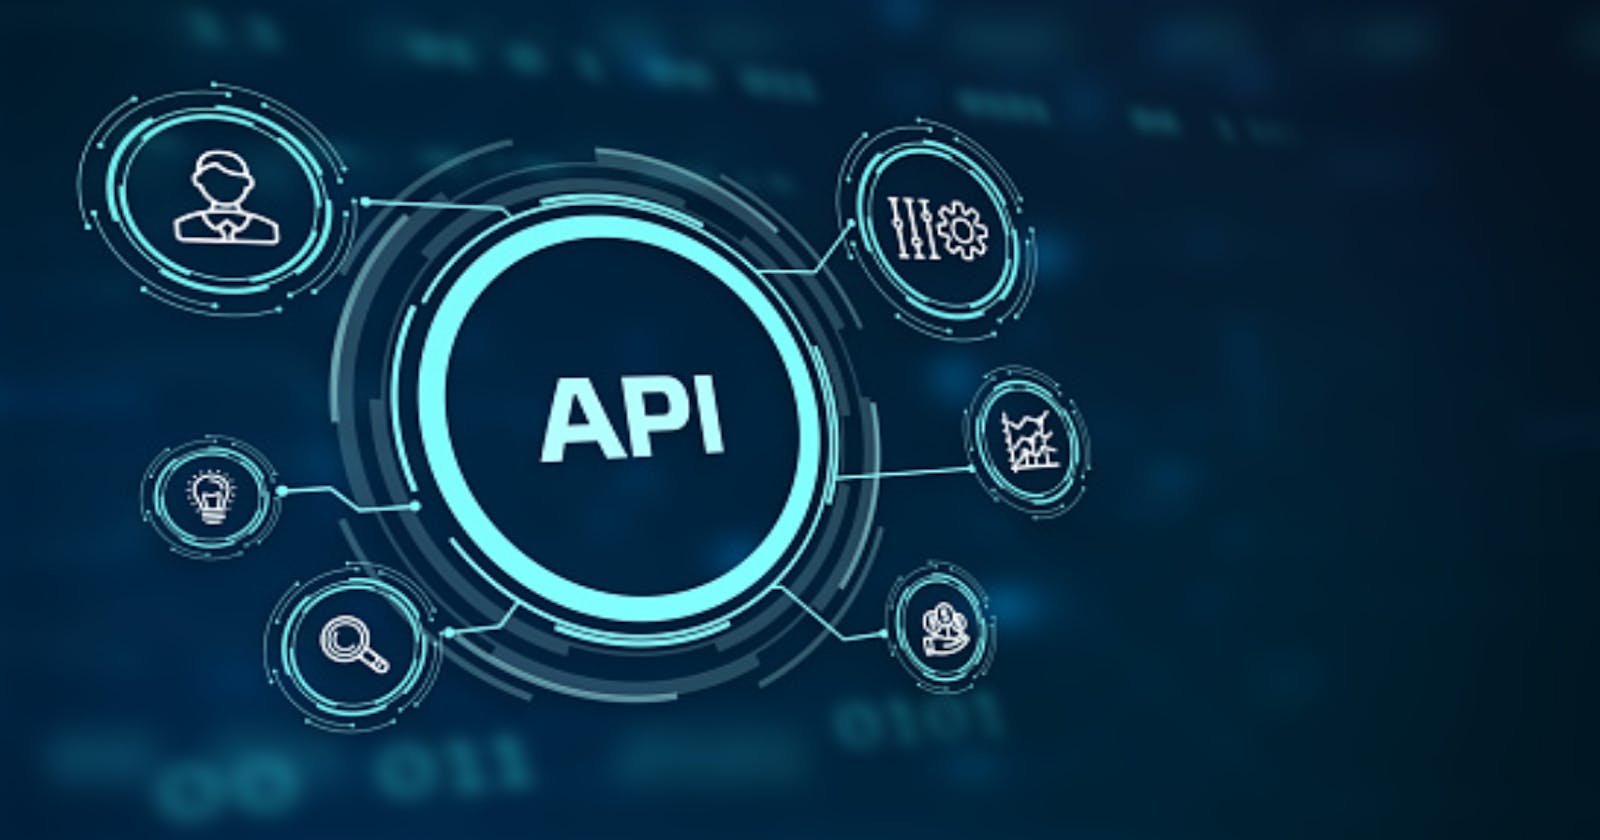 Getting started with Application Programming Interface (API)